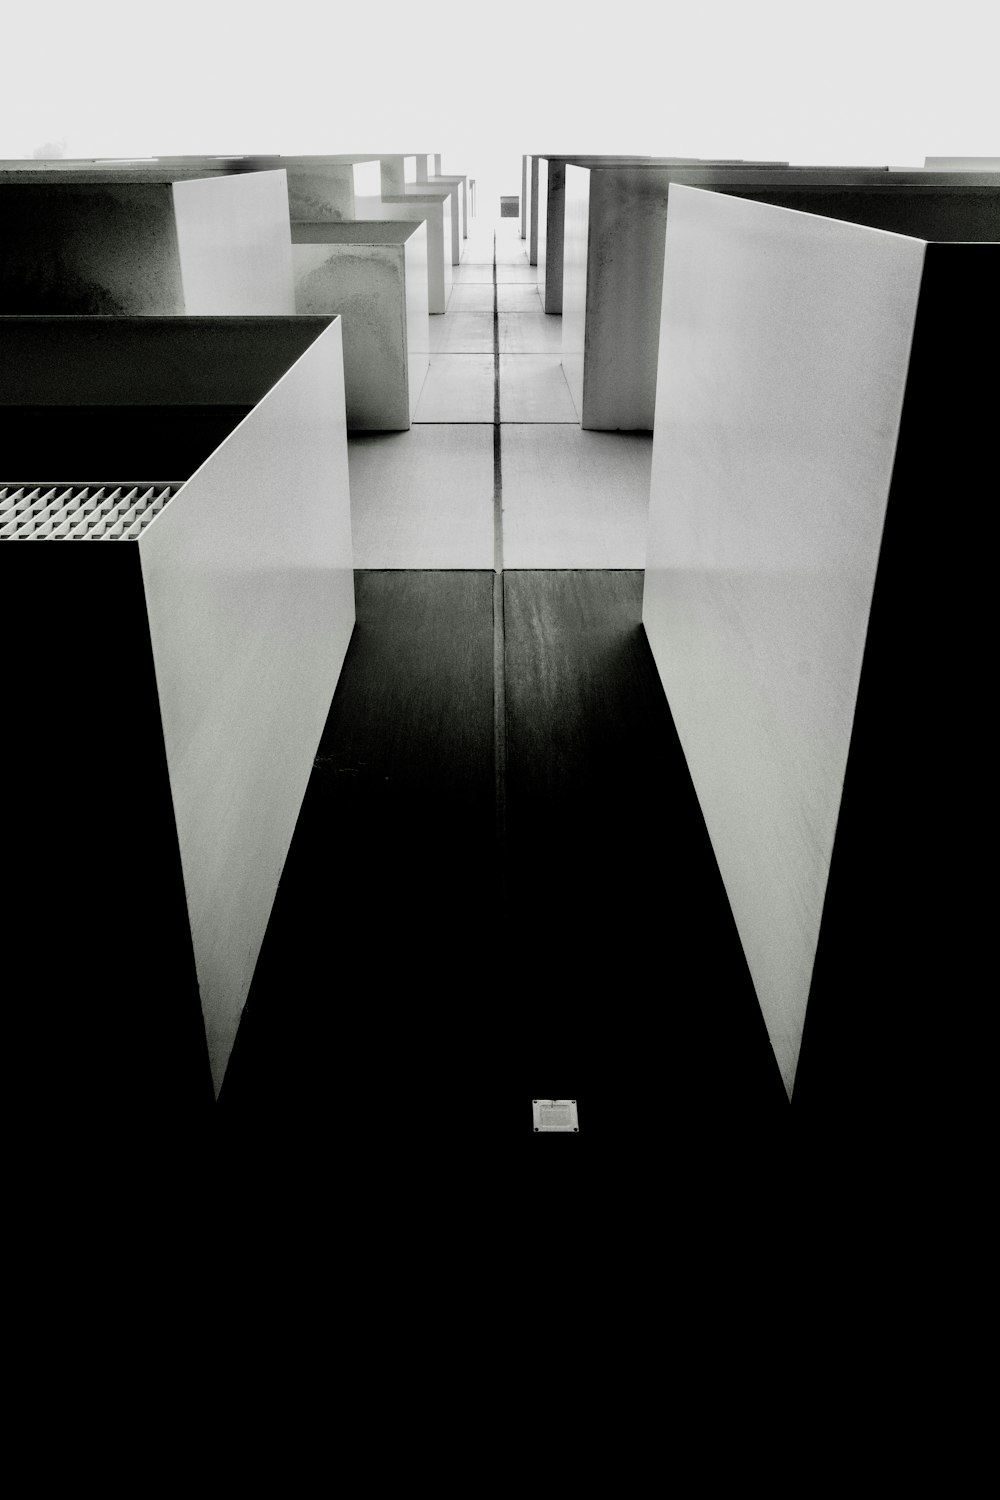 a black and white photo of a hallway